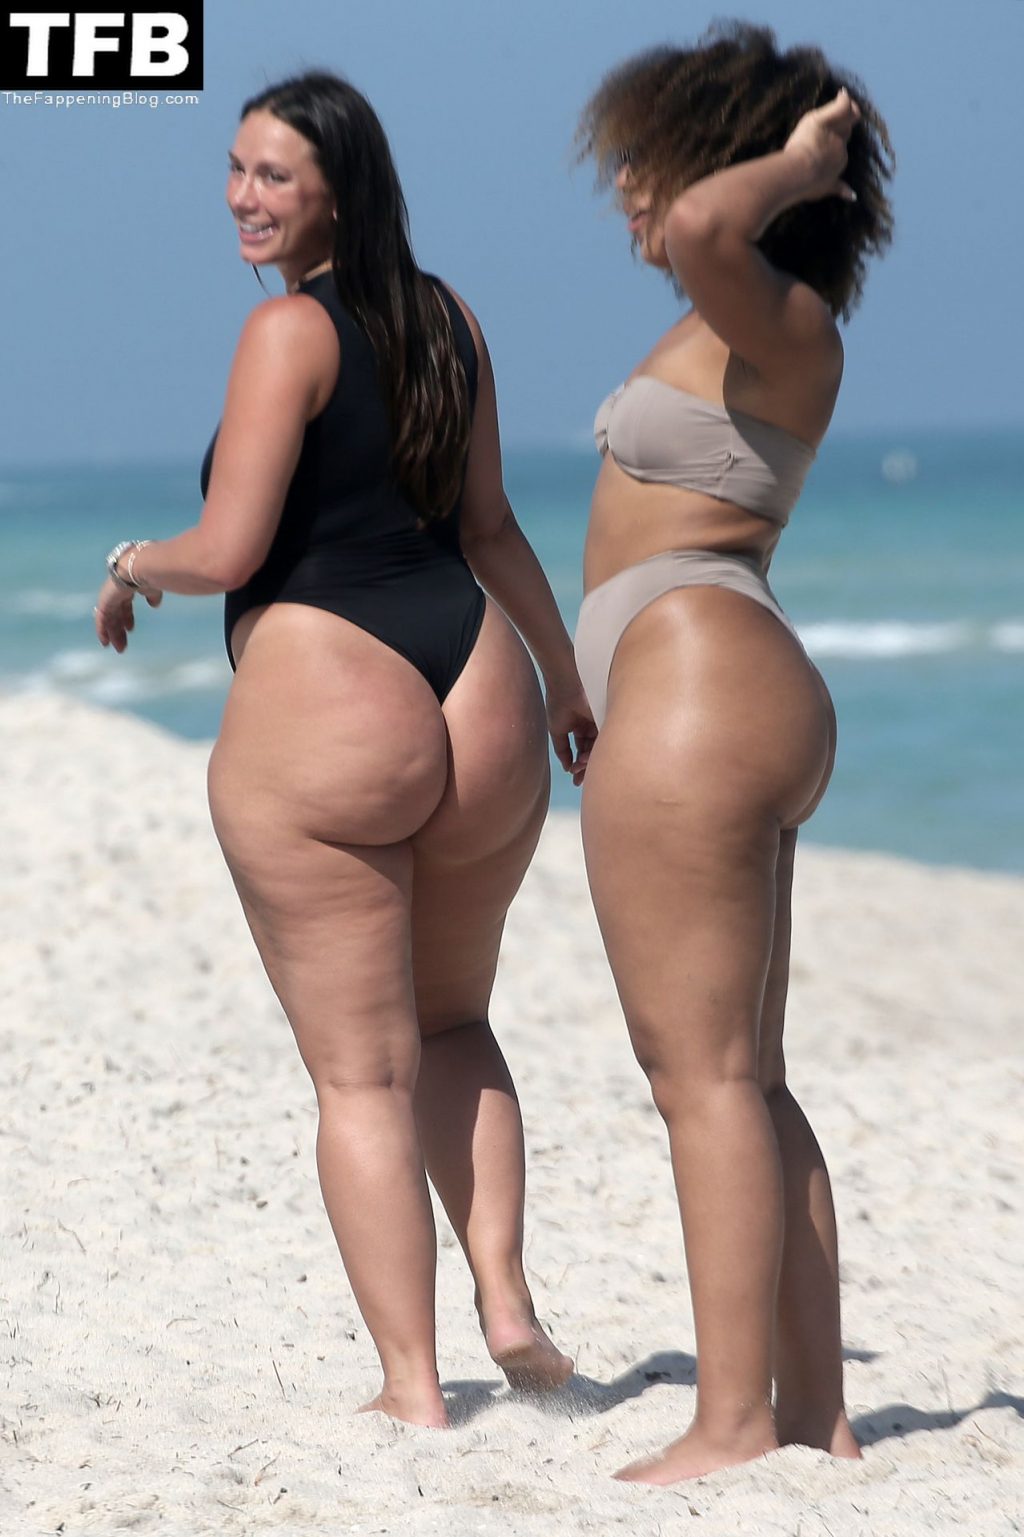 Bianca Elouise &amp; Yes Julz Show Their Curves on the Beach in Miami (62 Photos)